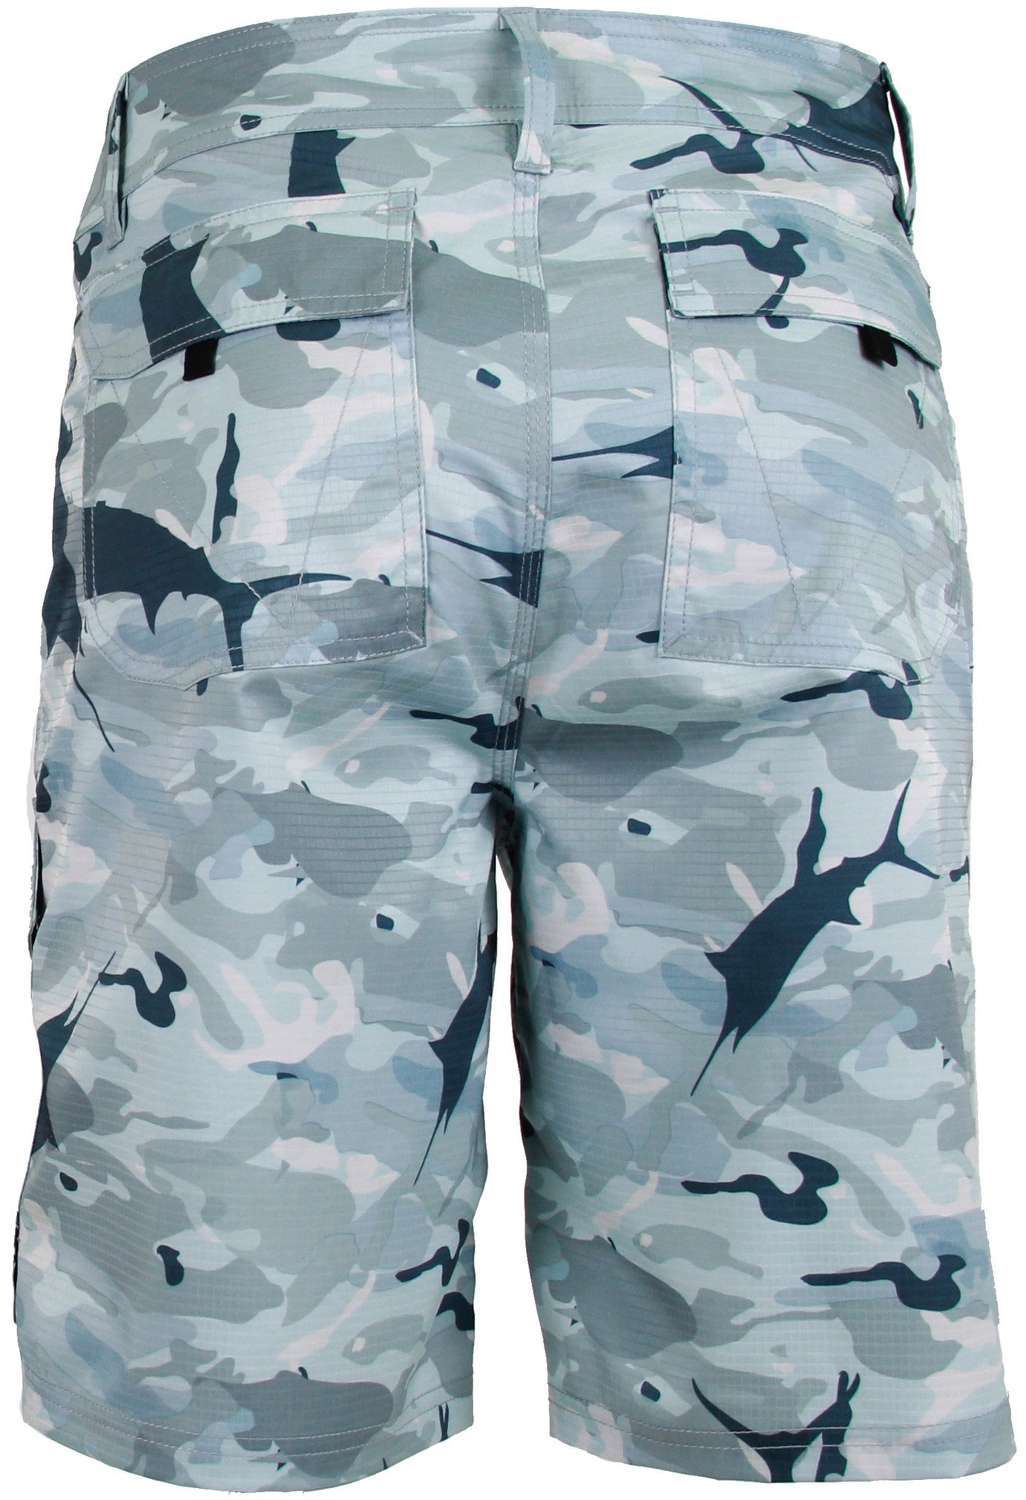 AFTCO M82 Tactical Fishing Shorts - Grey Camo - Size 34